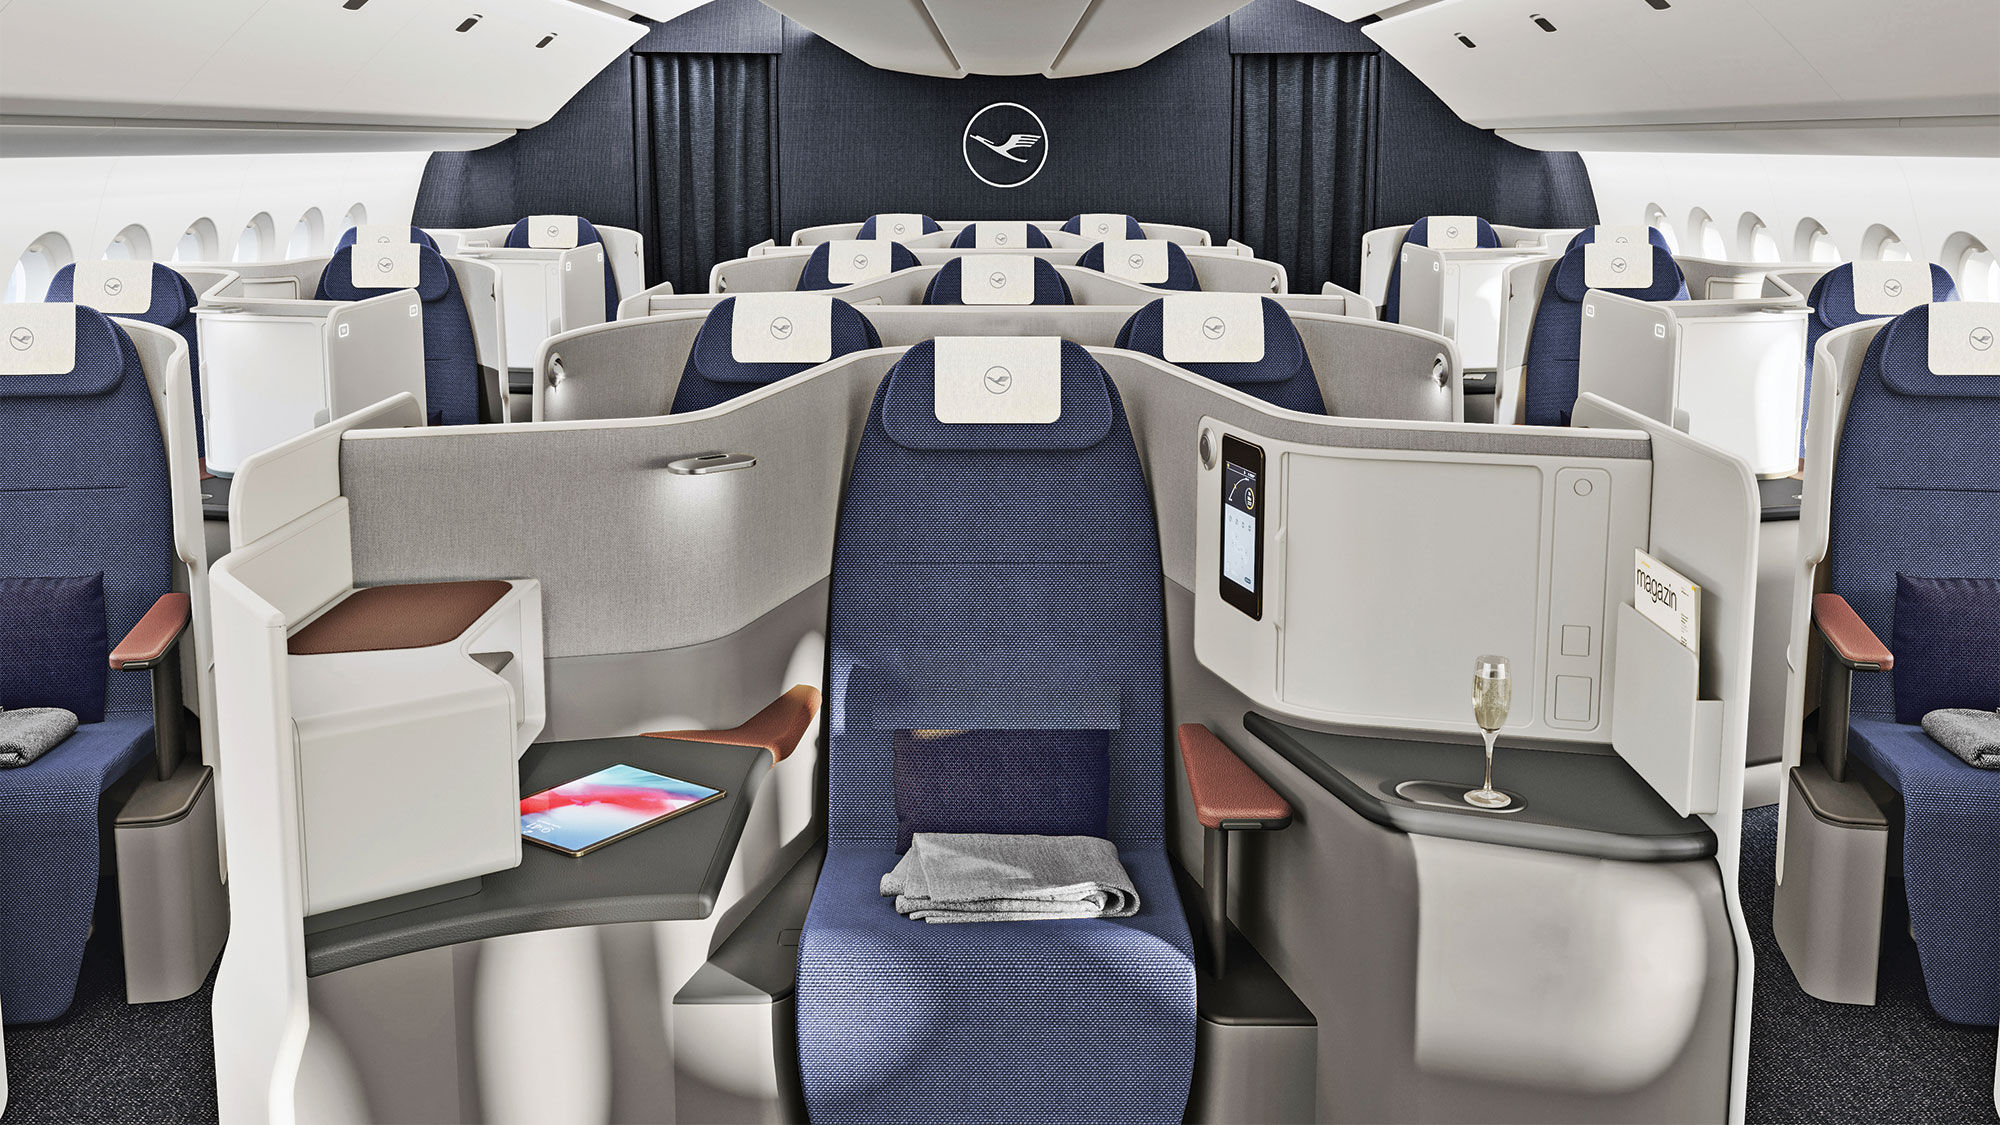 Lufthansa will sell seven distinct business-class products on Allegris-configured aircraft.